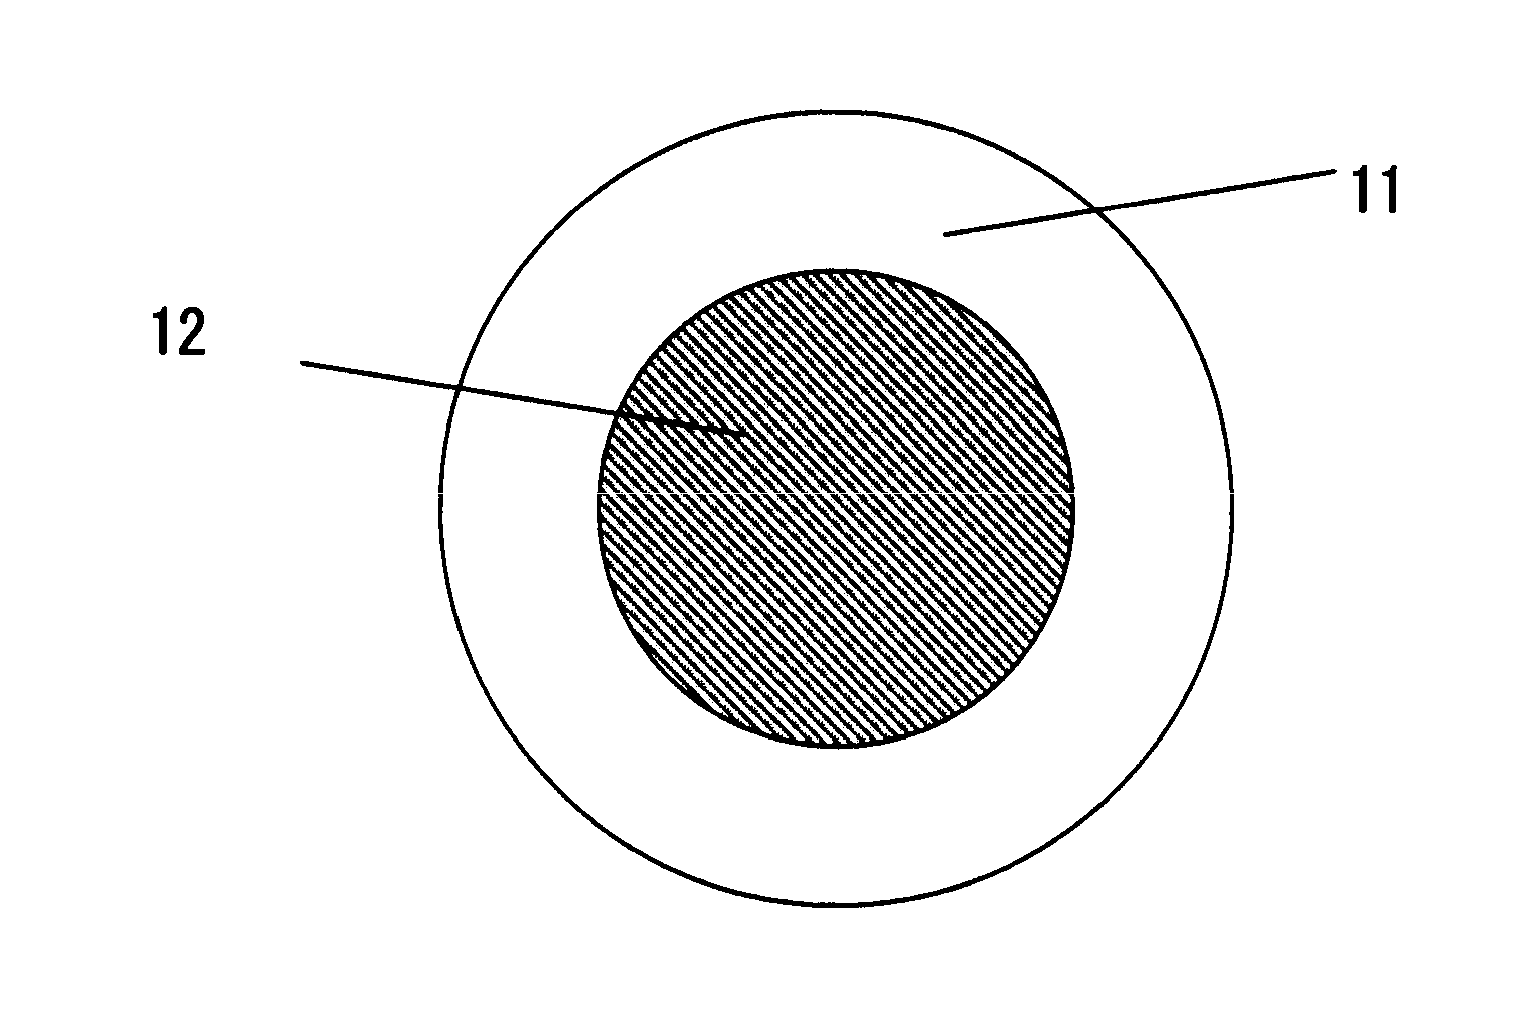 Process for producing heat-expandable microspheres and application thereof